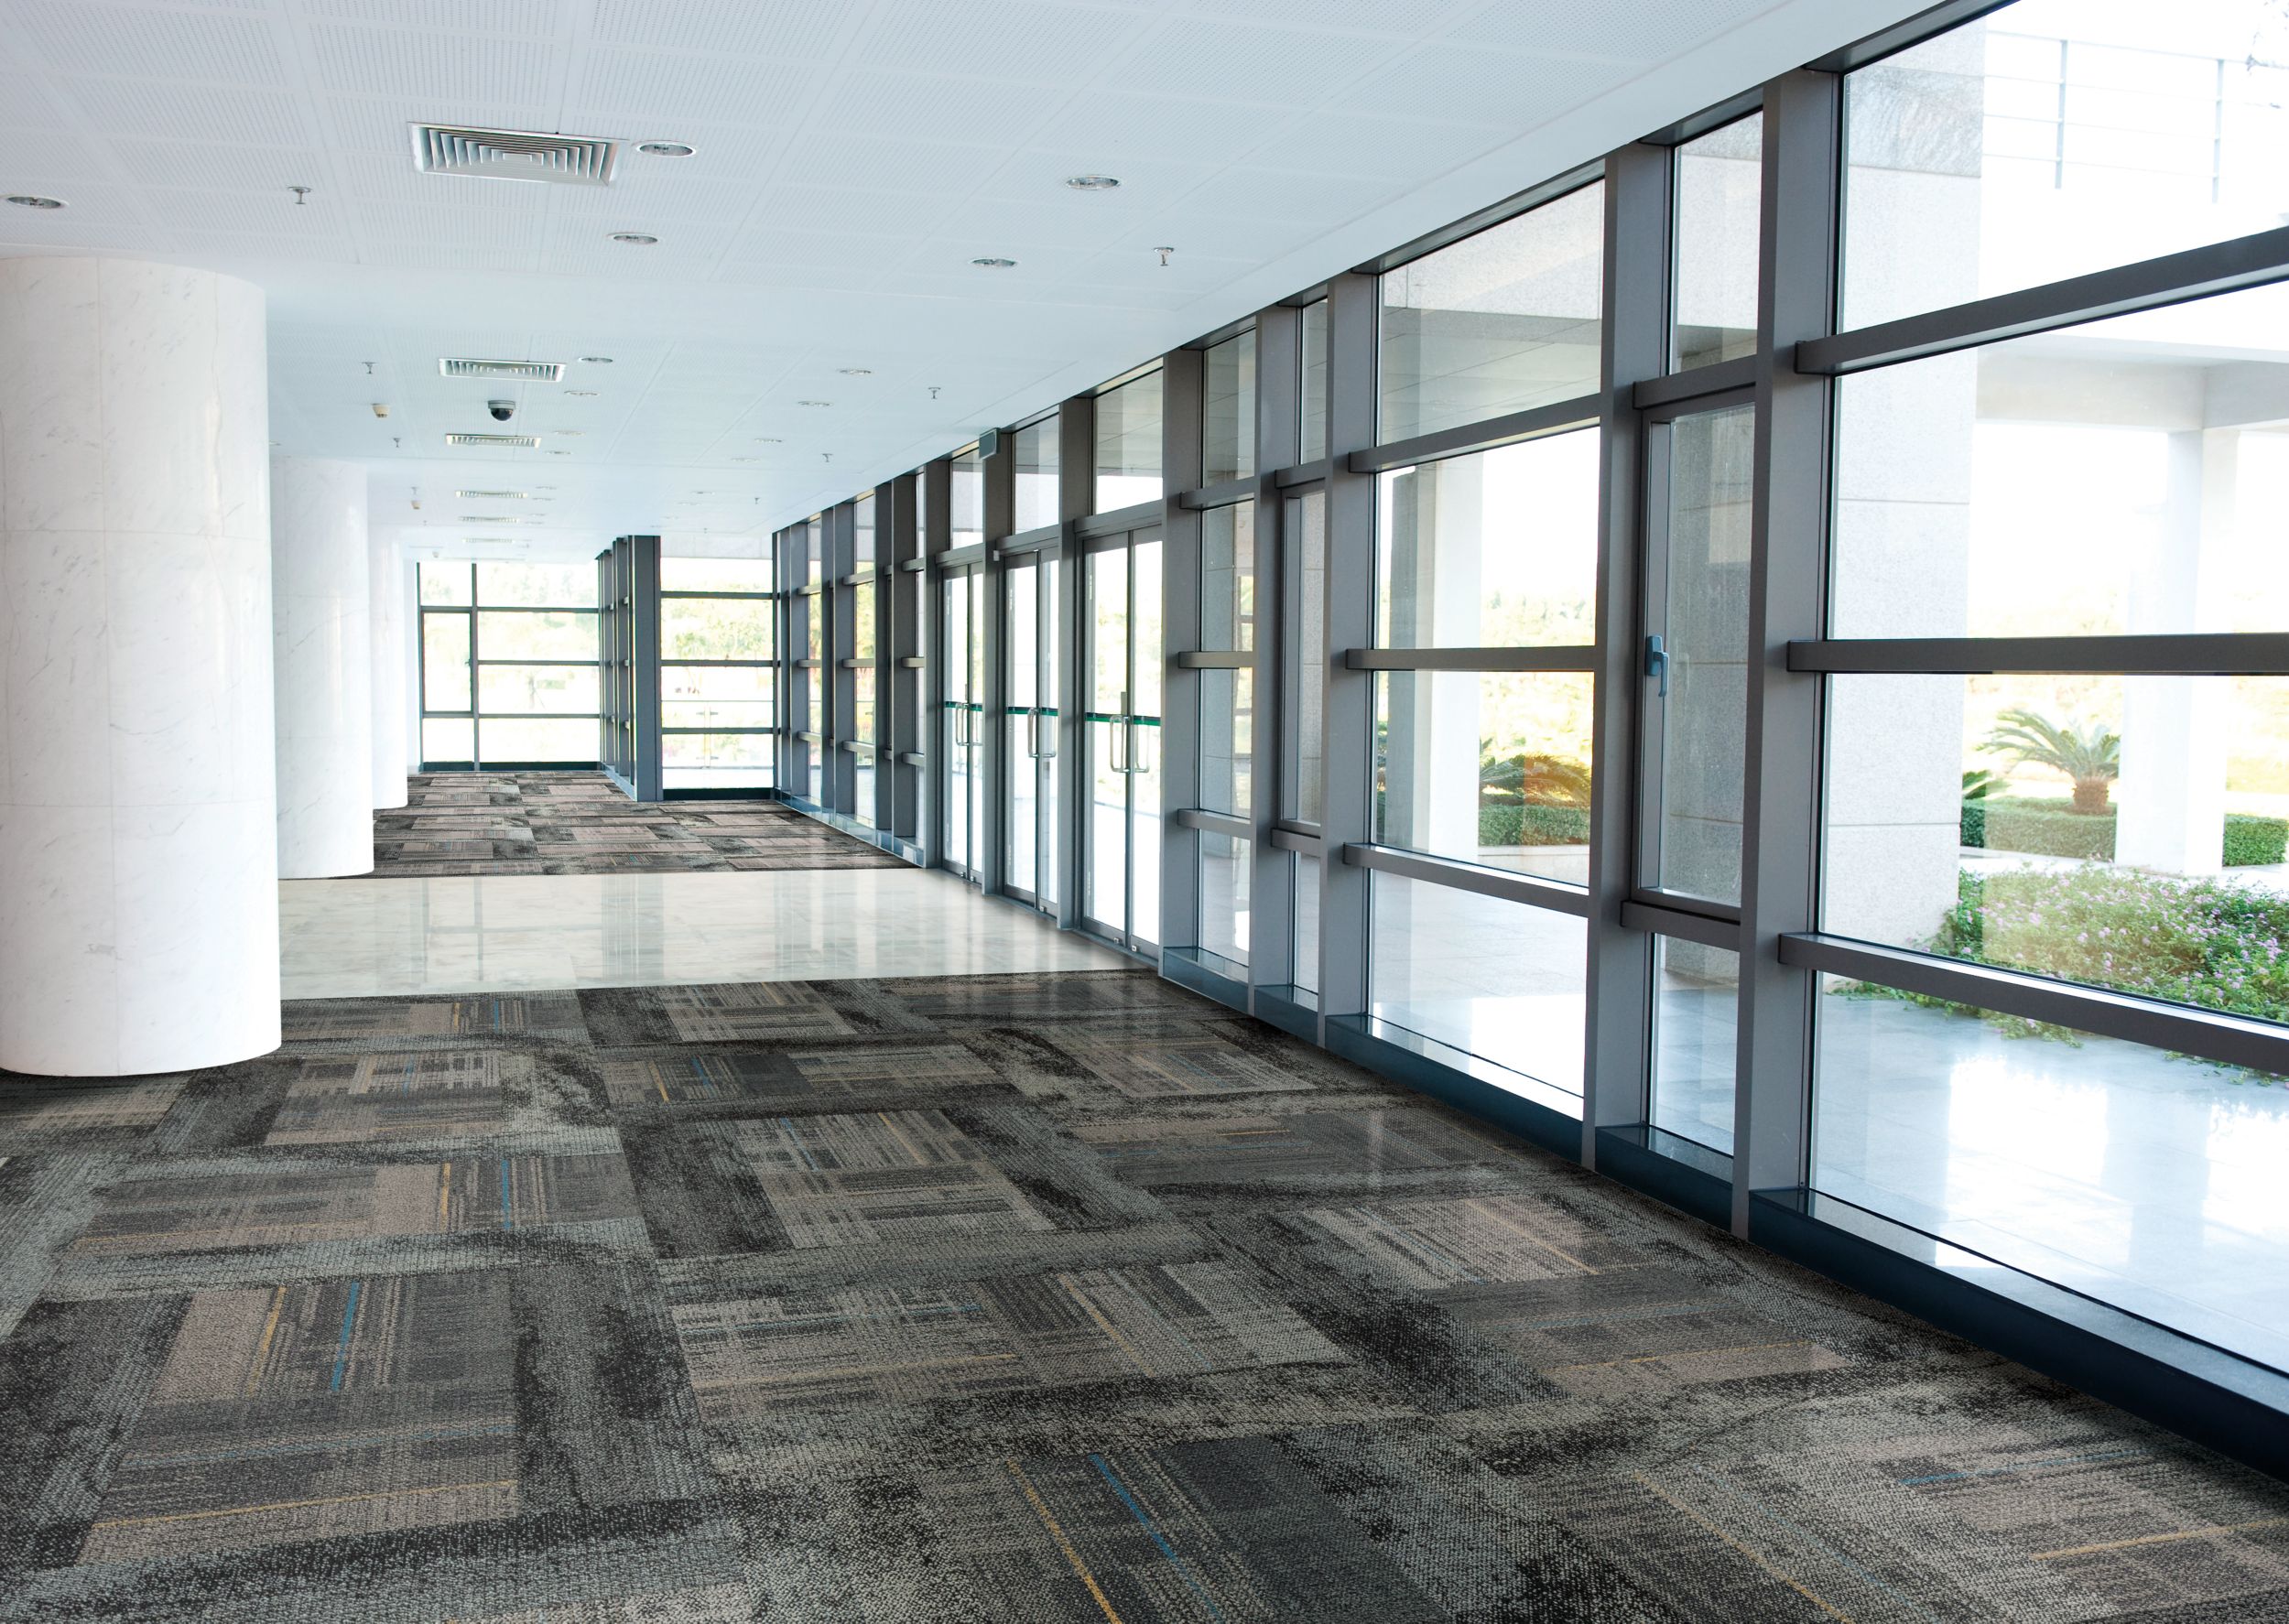 Interface AE312 carpet tile with Neighborhood Smooth plank carpet tile and Interface Textured Stones LVT in corridor with glass walls image number 7